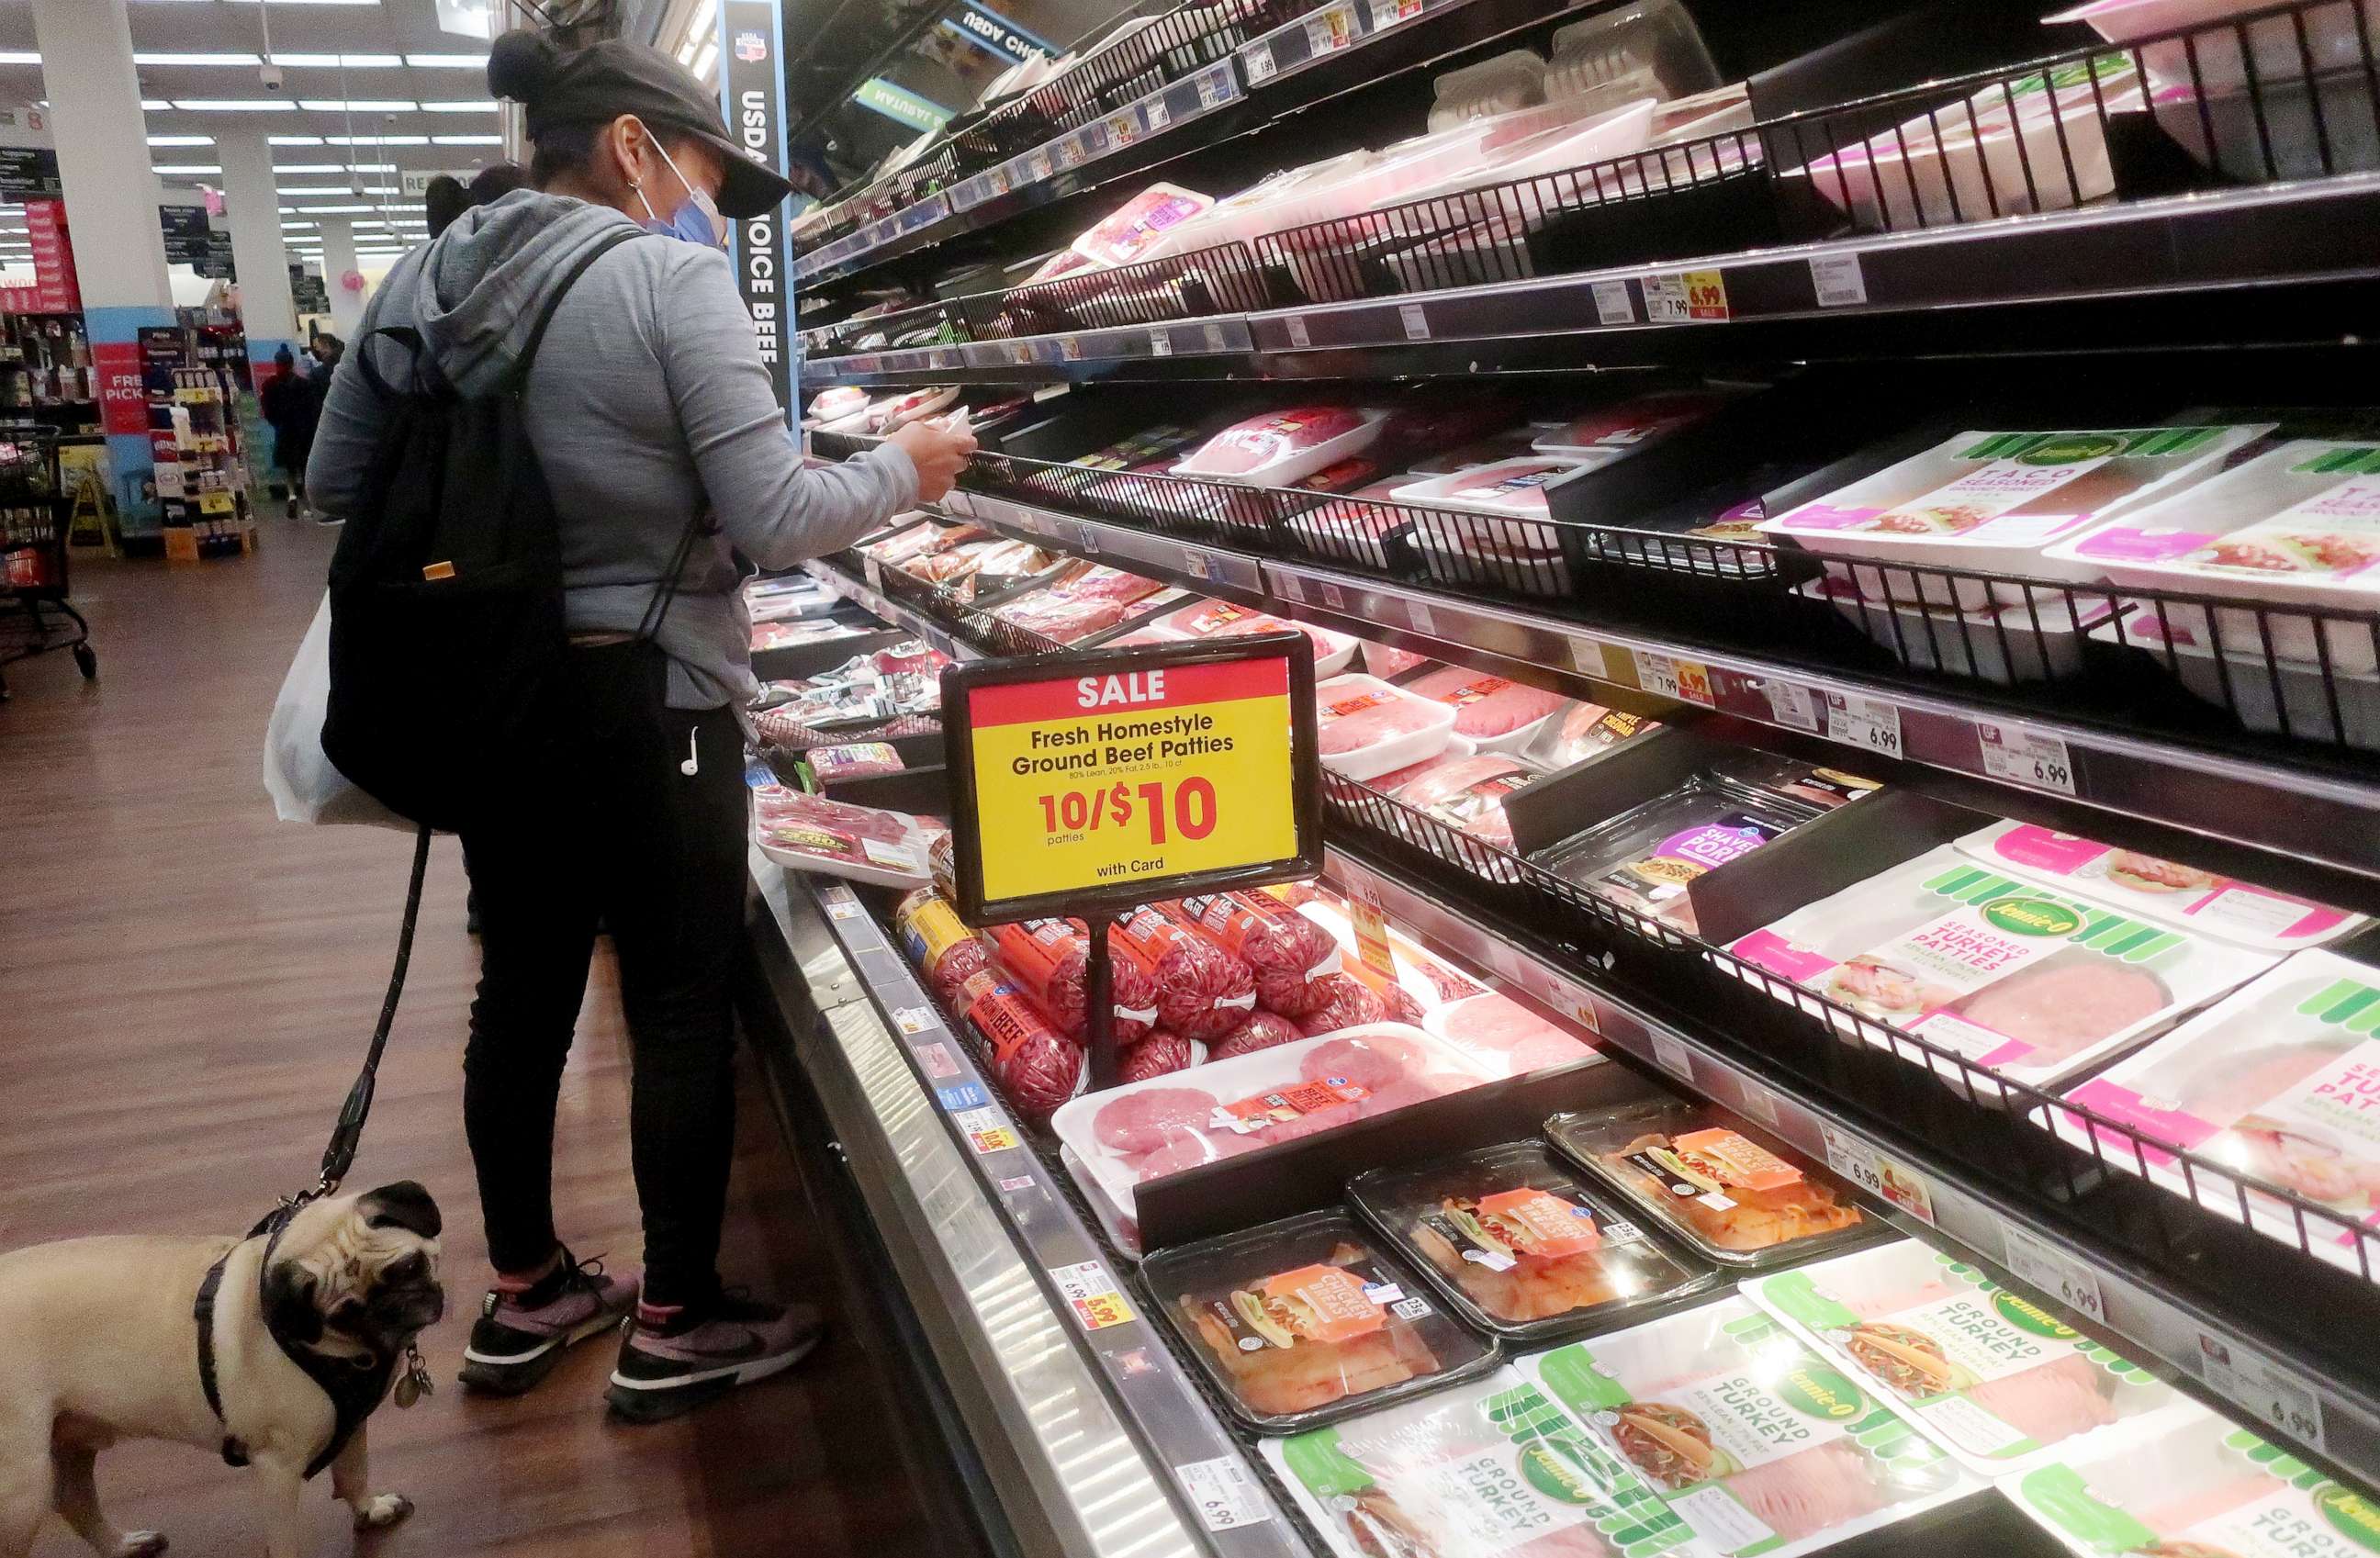 PHOTO: A person shops in the beef section of a supermarket on February 13, 2023 in Los Angeles.